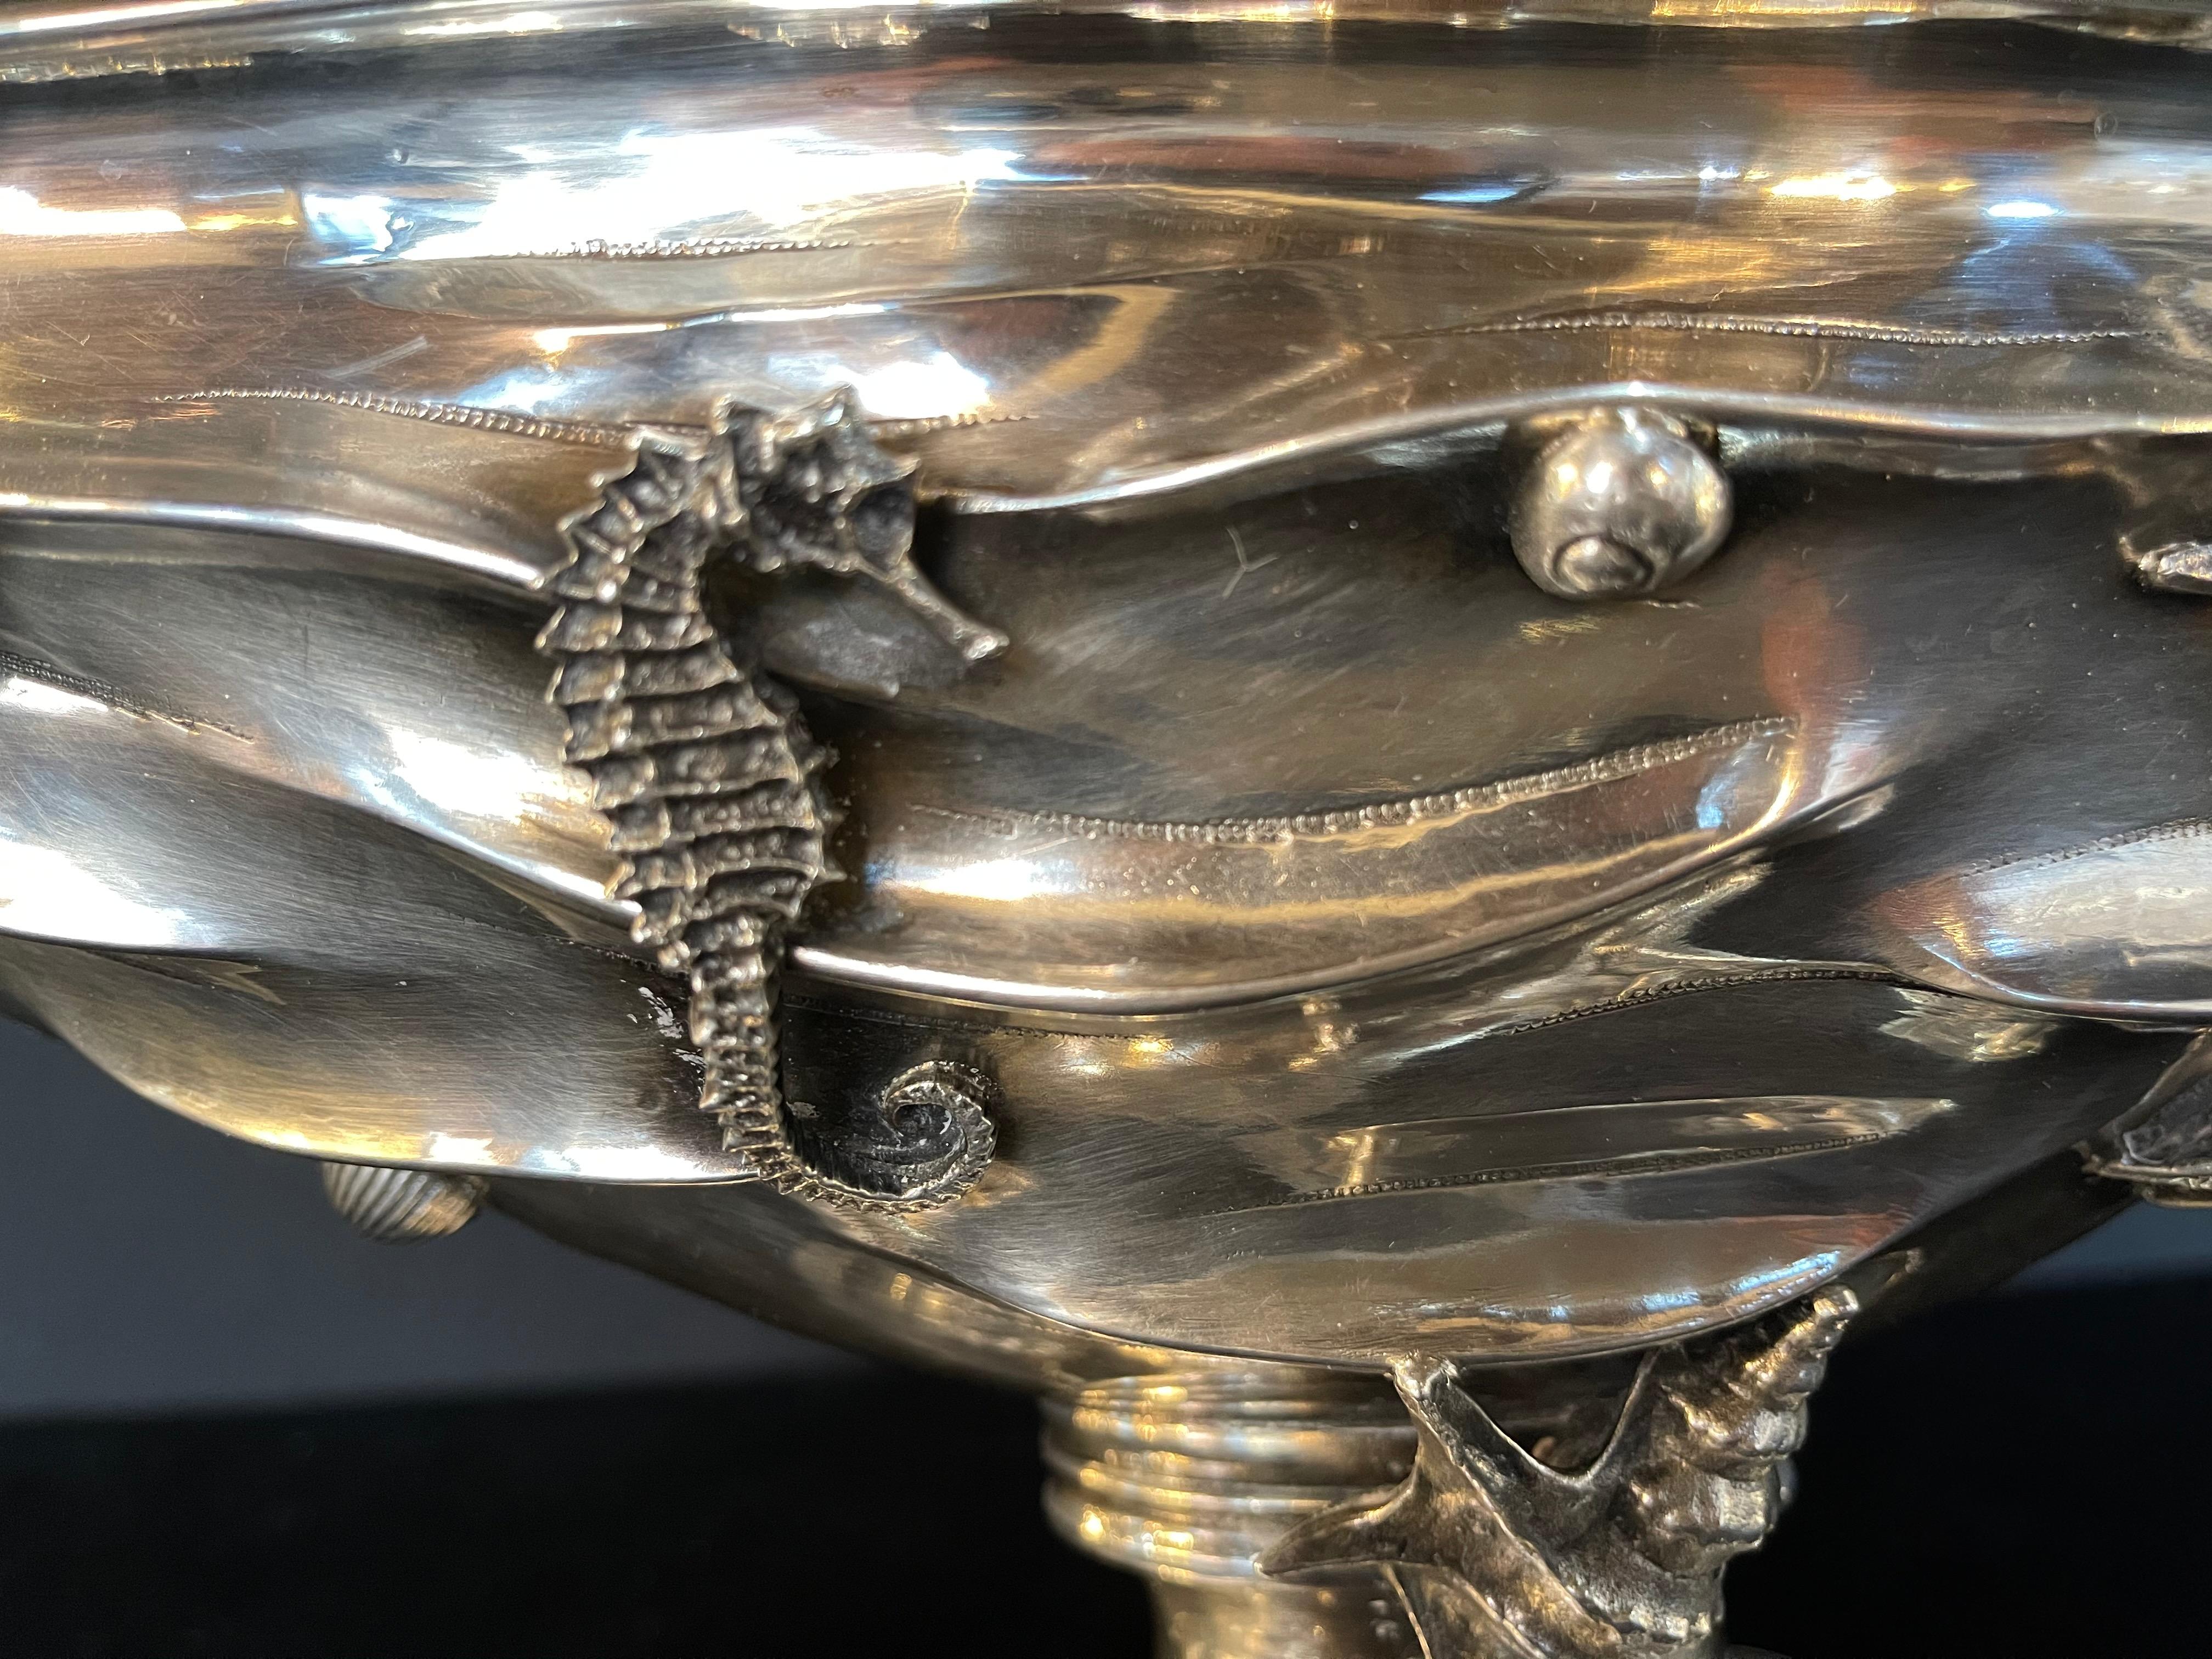 Italian sterling silver figurial centerpiece 88 troy Ozs. Buccellati style centerpiece hallmarked and stamped Italy Sterling. This one of a kind centerpiece is solid sterling having a shell base wonderfully decorated with seahorses, seashells,